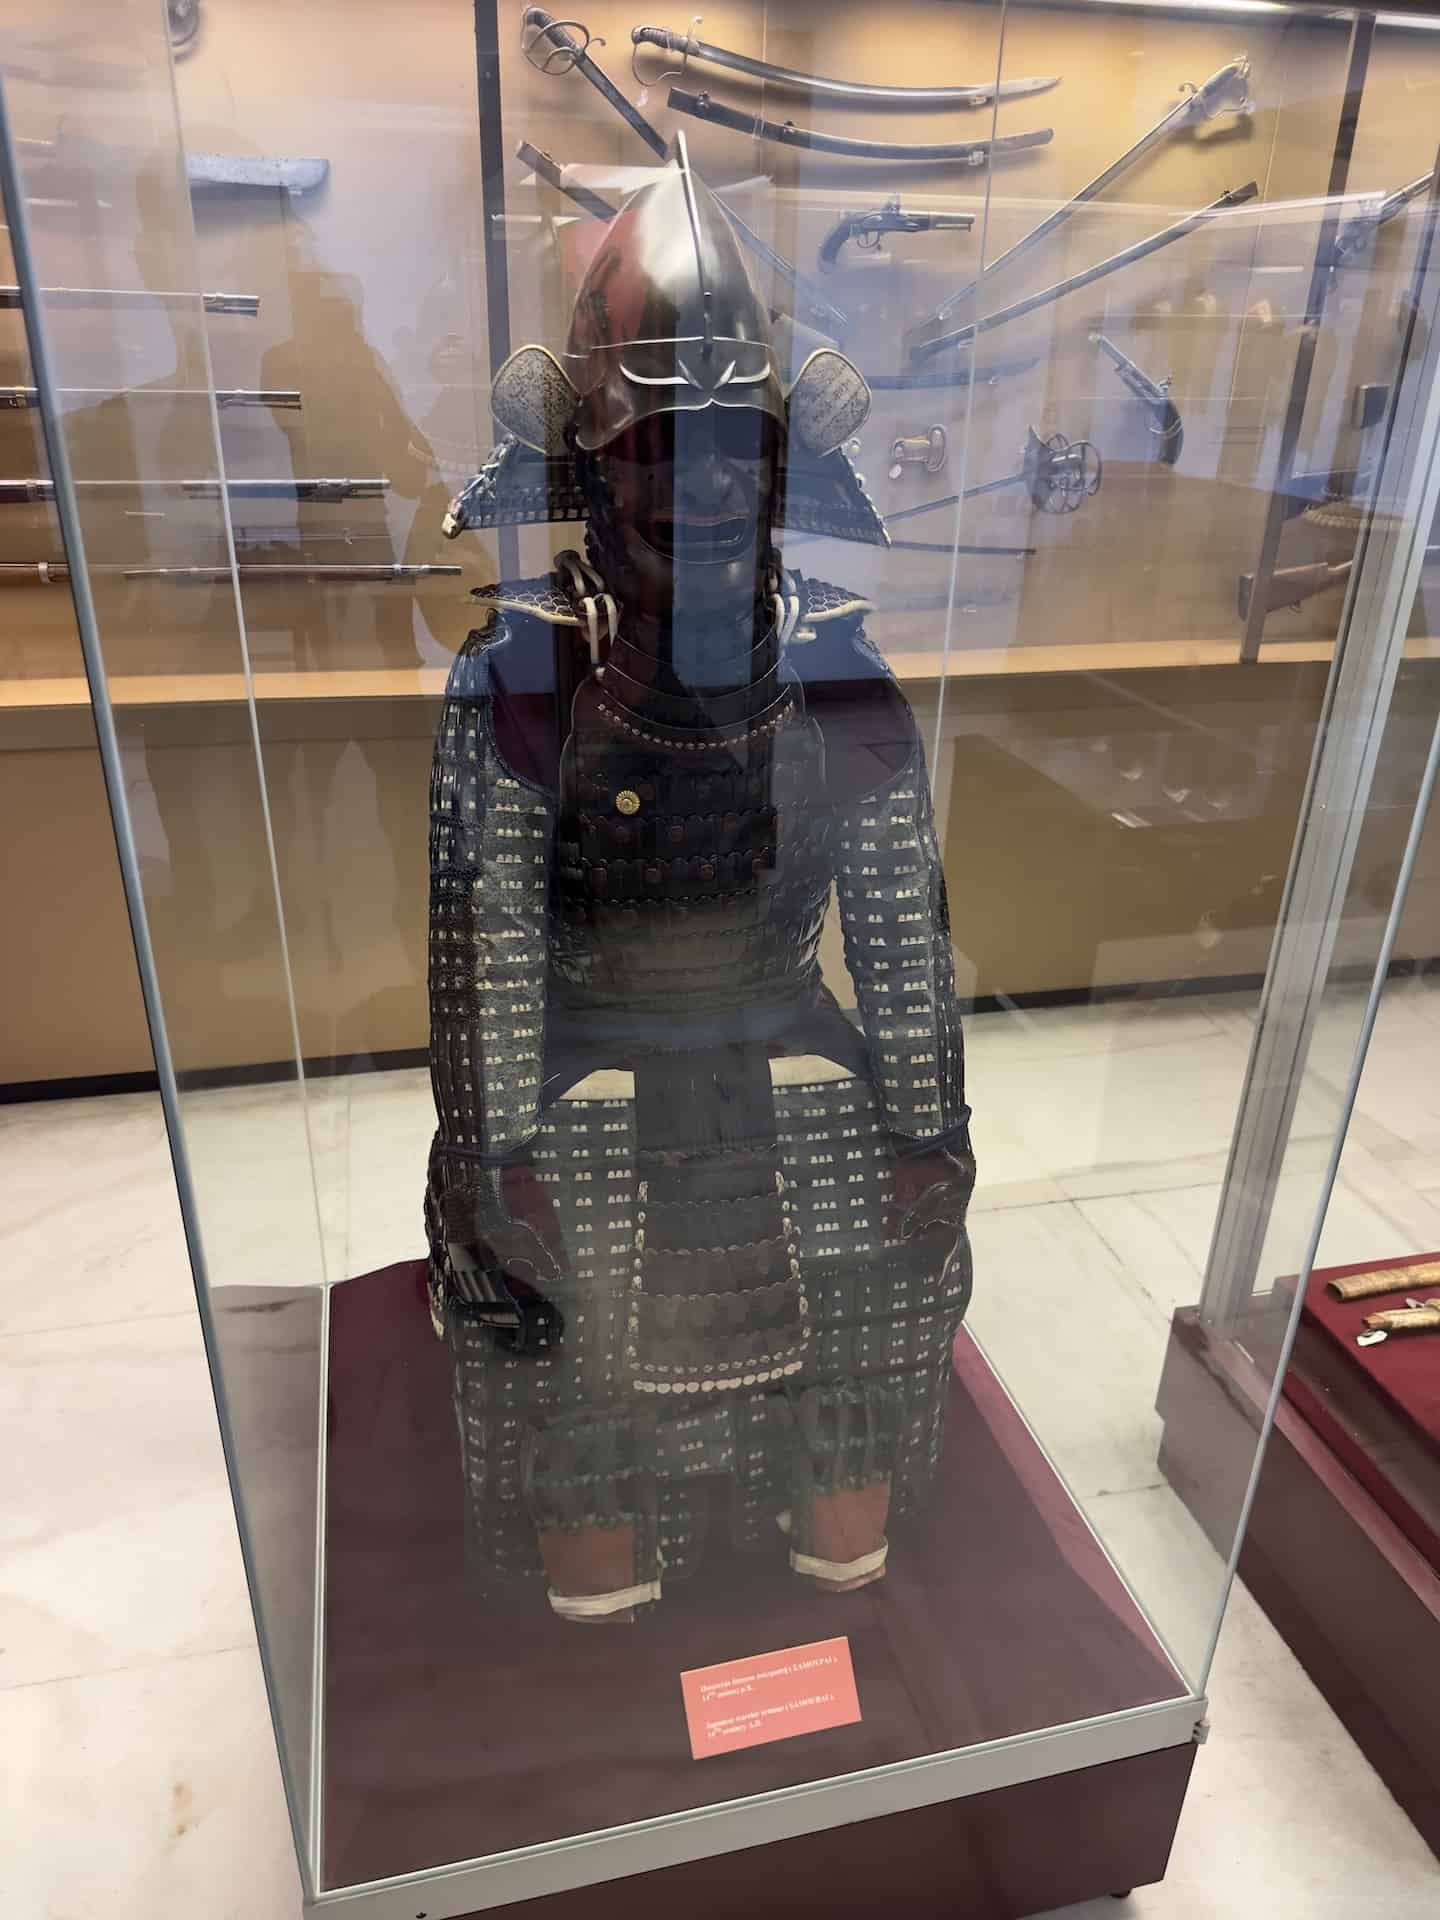 Japanese samurai warrior armor, 14th century in the weapons gallery at the War Museum in Athens, Greece